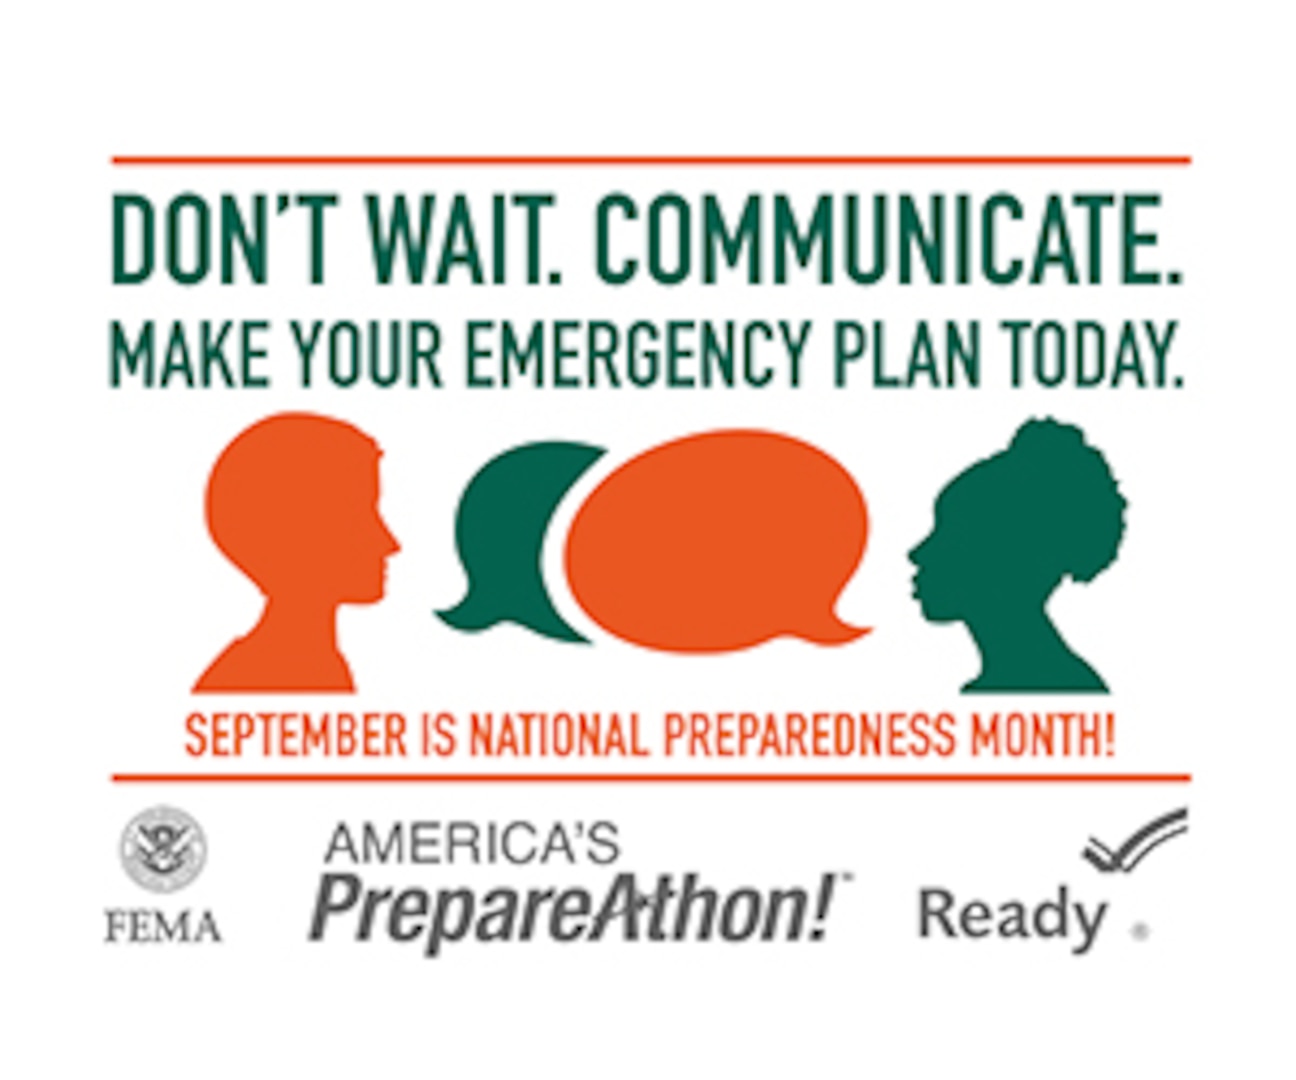 During National Preparedness Month, several activities involving the workforce are scheduled to be conducted at Defense Supply Center Columbus. 